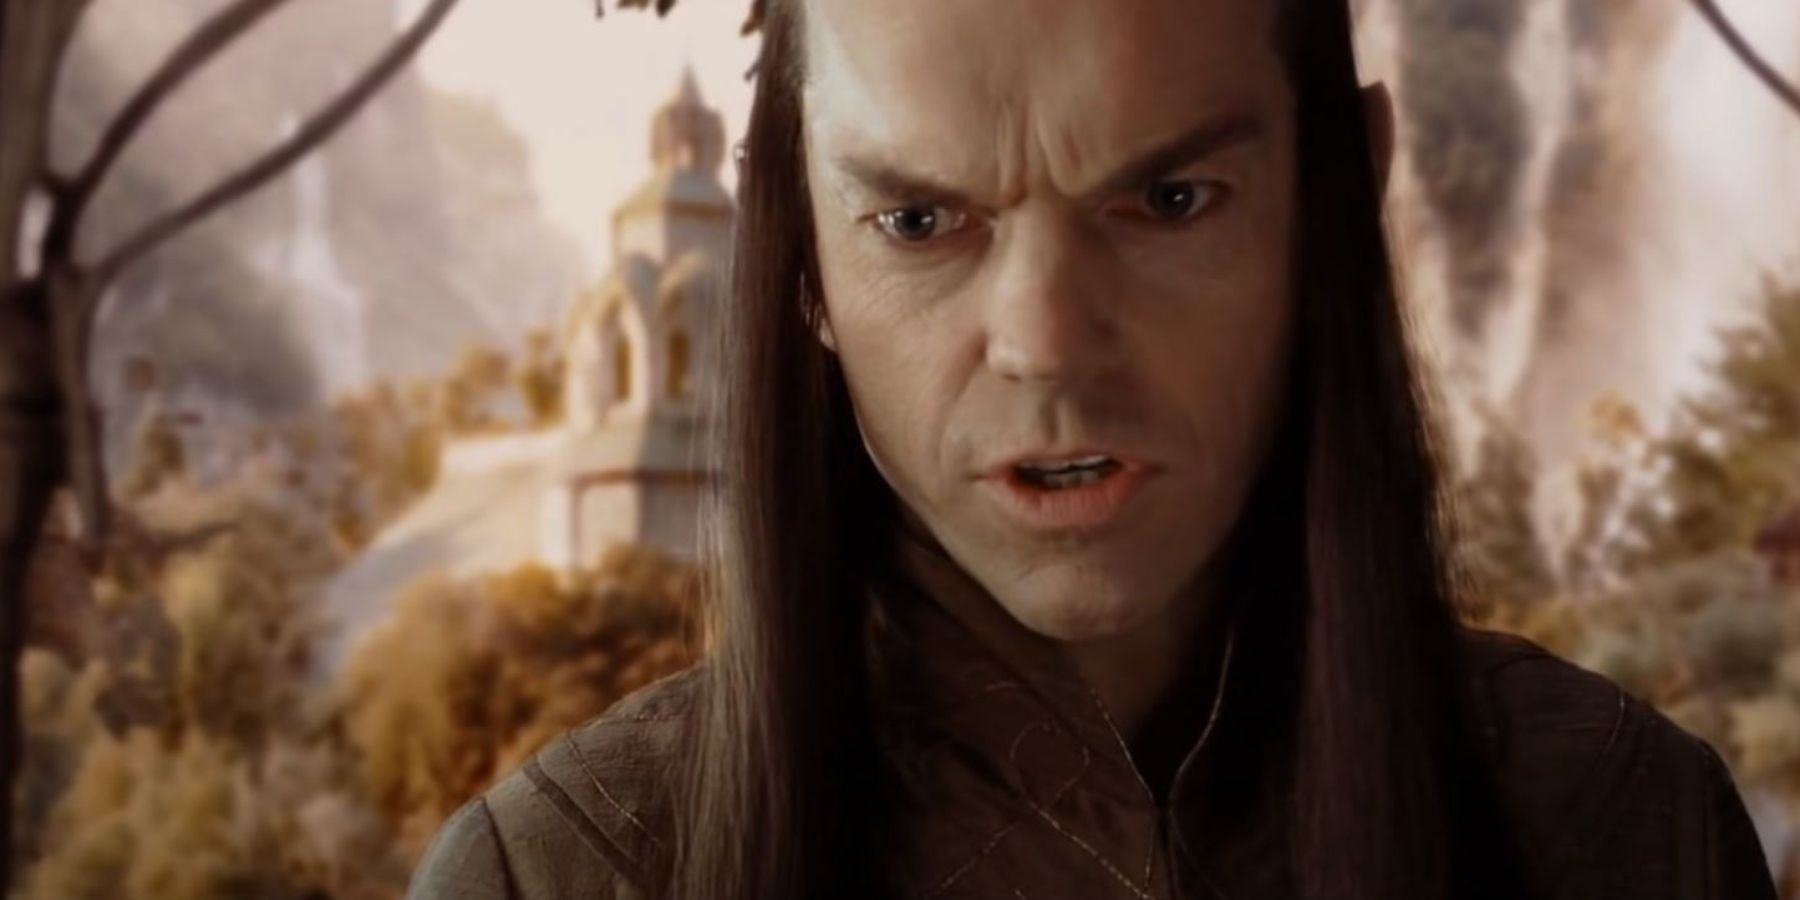 Elrond looks to the future and sees death